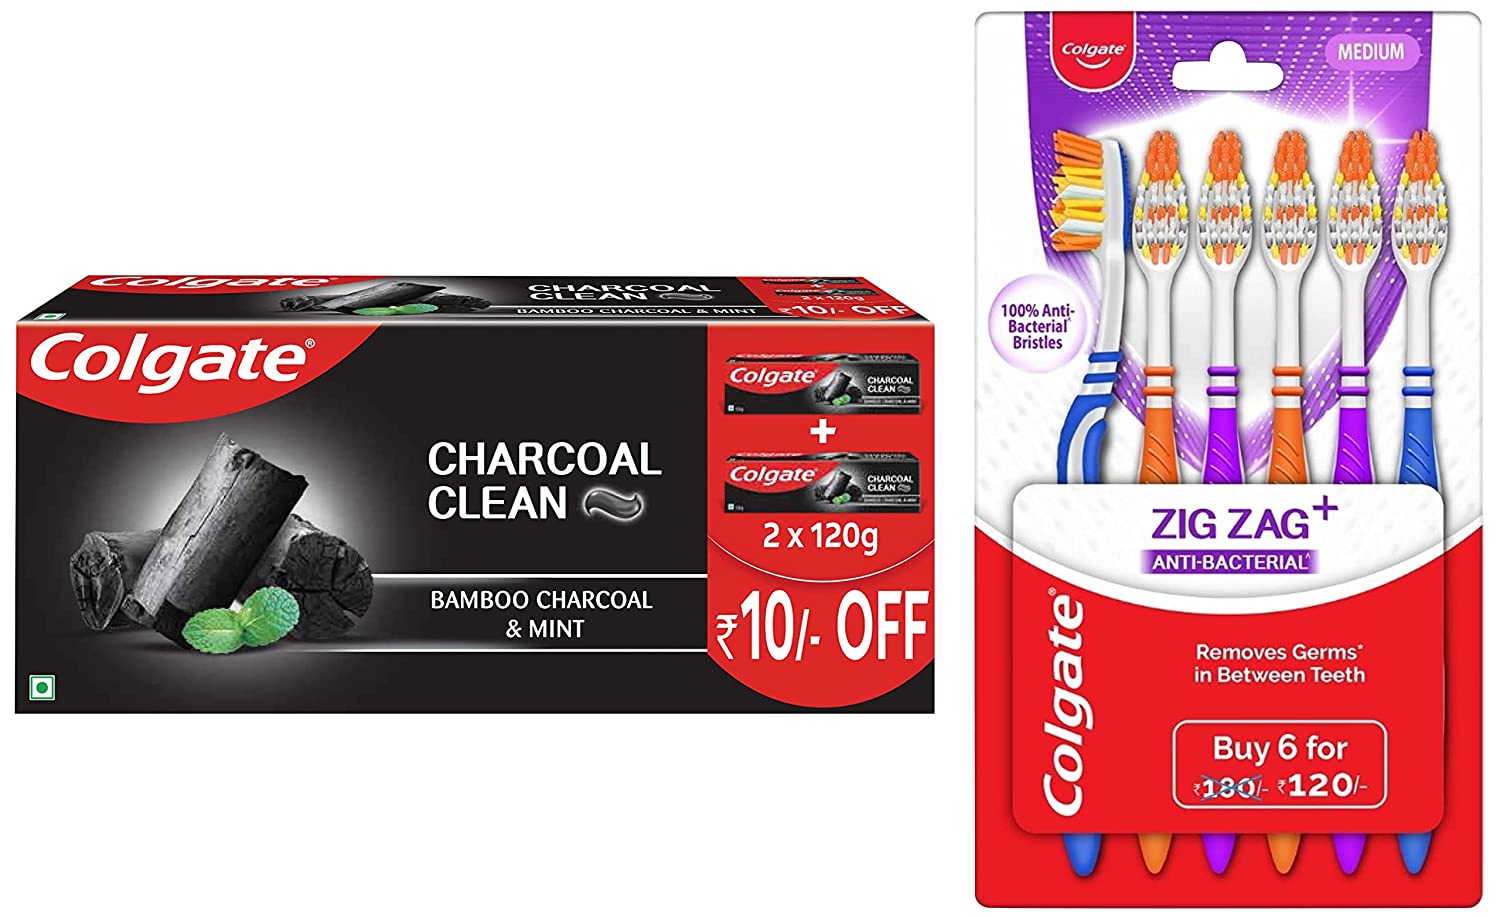 Colgate Toothpaste Charcoal Clean - Bamboo Charcoal & Mint (120gm each) + Colgate ZigZag Manual Toothbrush for adults, Pack of 6 Medium,Colgate Toothpaste Charcoal Clean,Colgate ZigZag Manual Toothbrush for adults